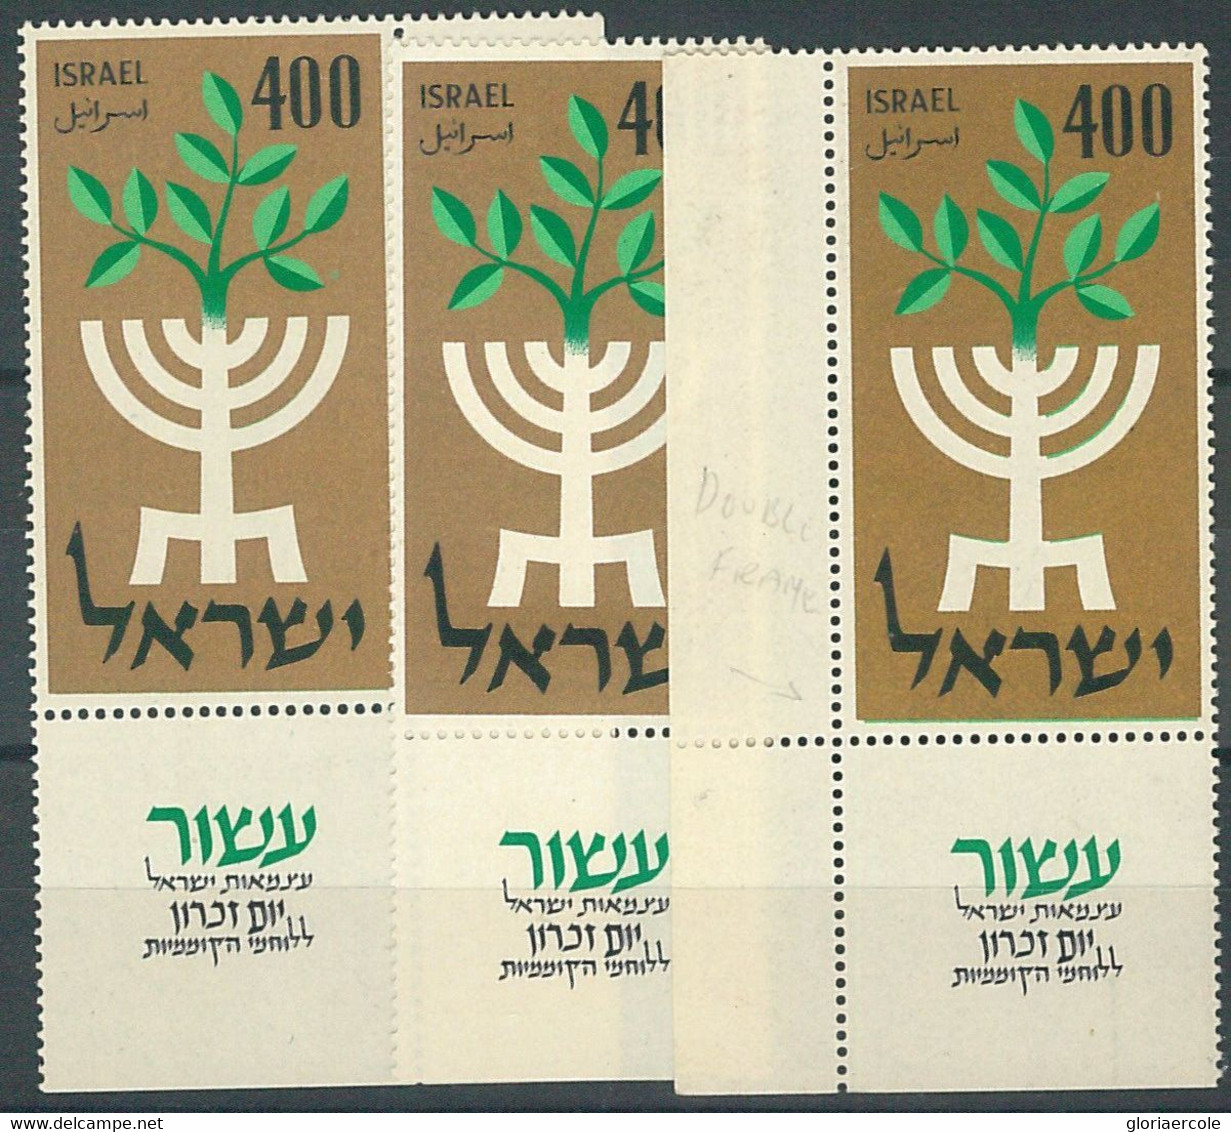 66234 -  ISRAEL - STAMP With ERROR - GERSHON  142/2 - Imperforates, Proofs & Errors